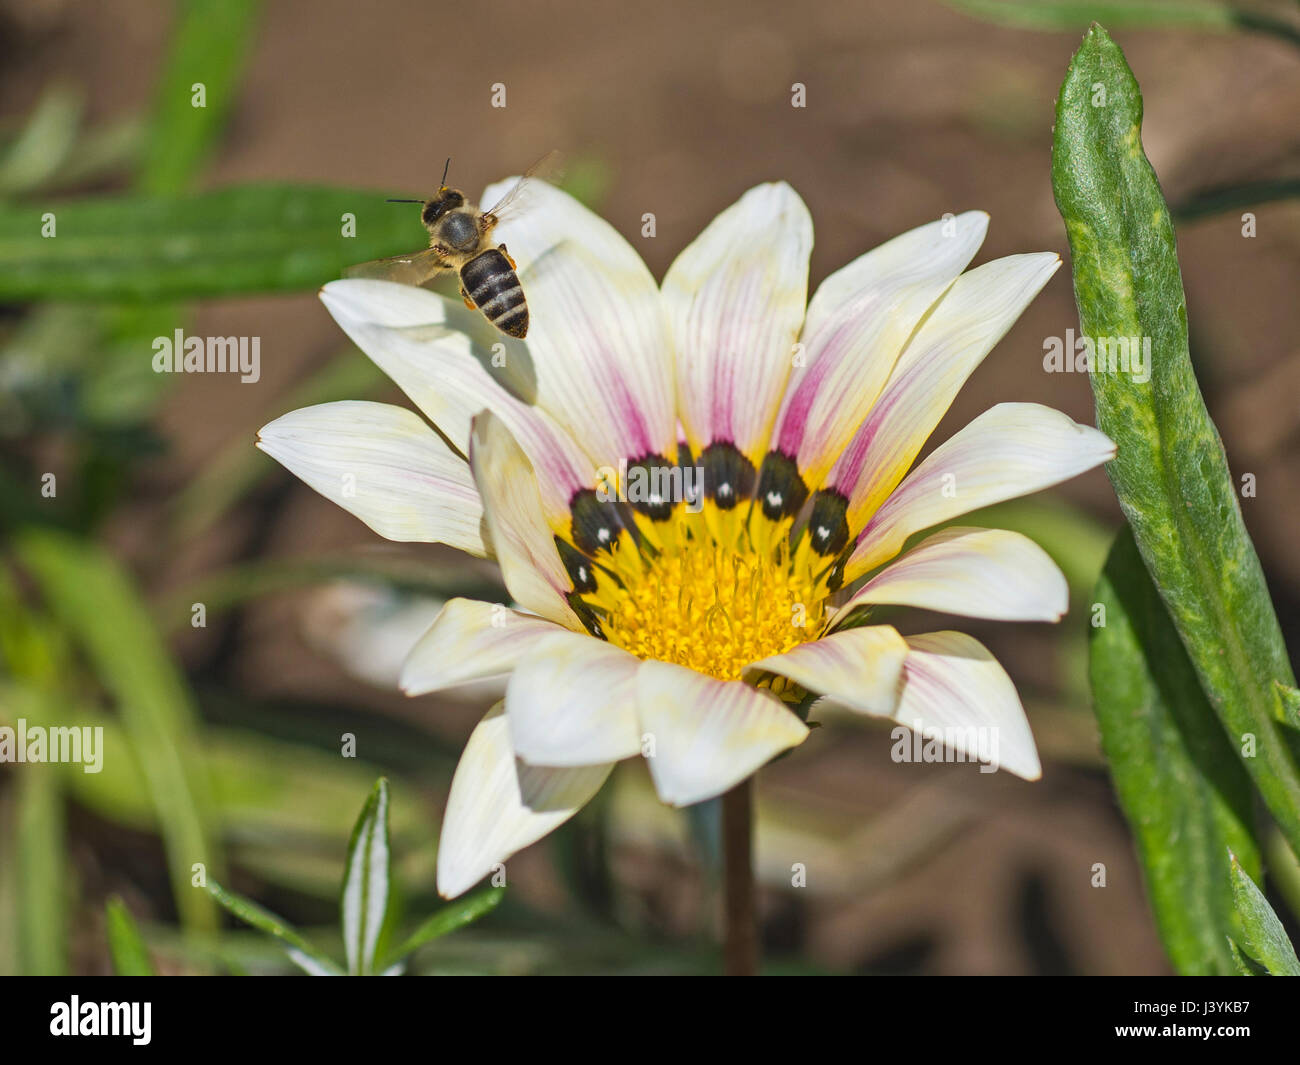 Close-up detail of a honey bee apis in flight collecting pollen on white daisy flower in garden Stock Photo